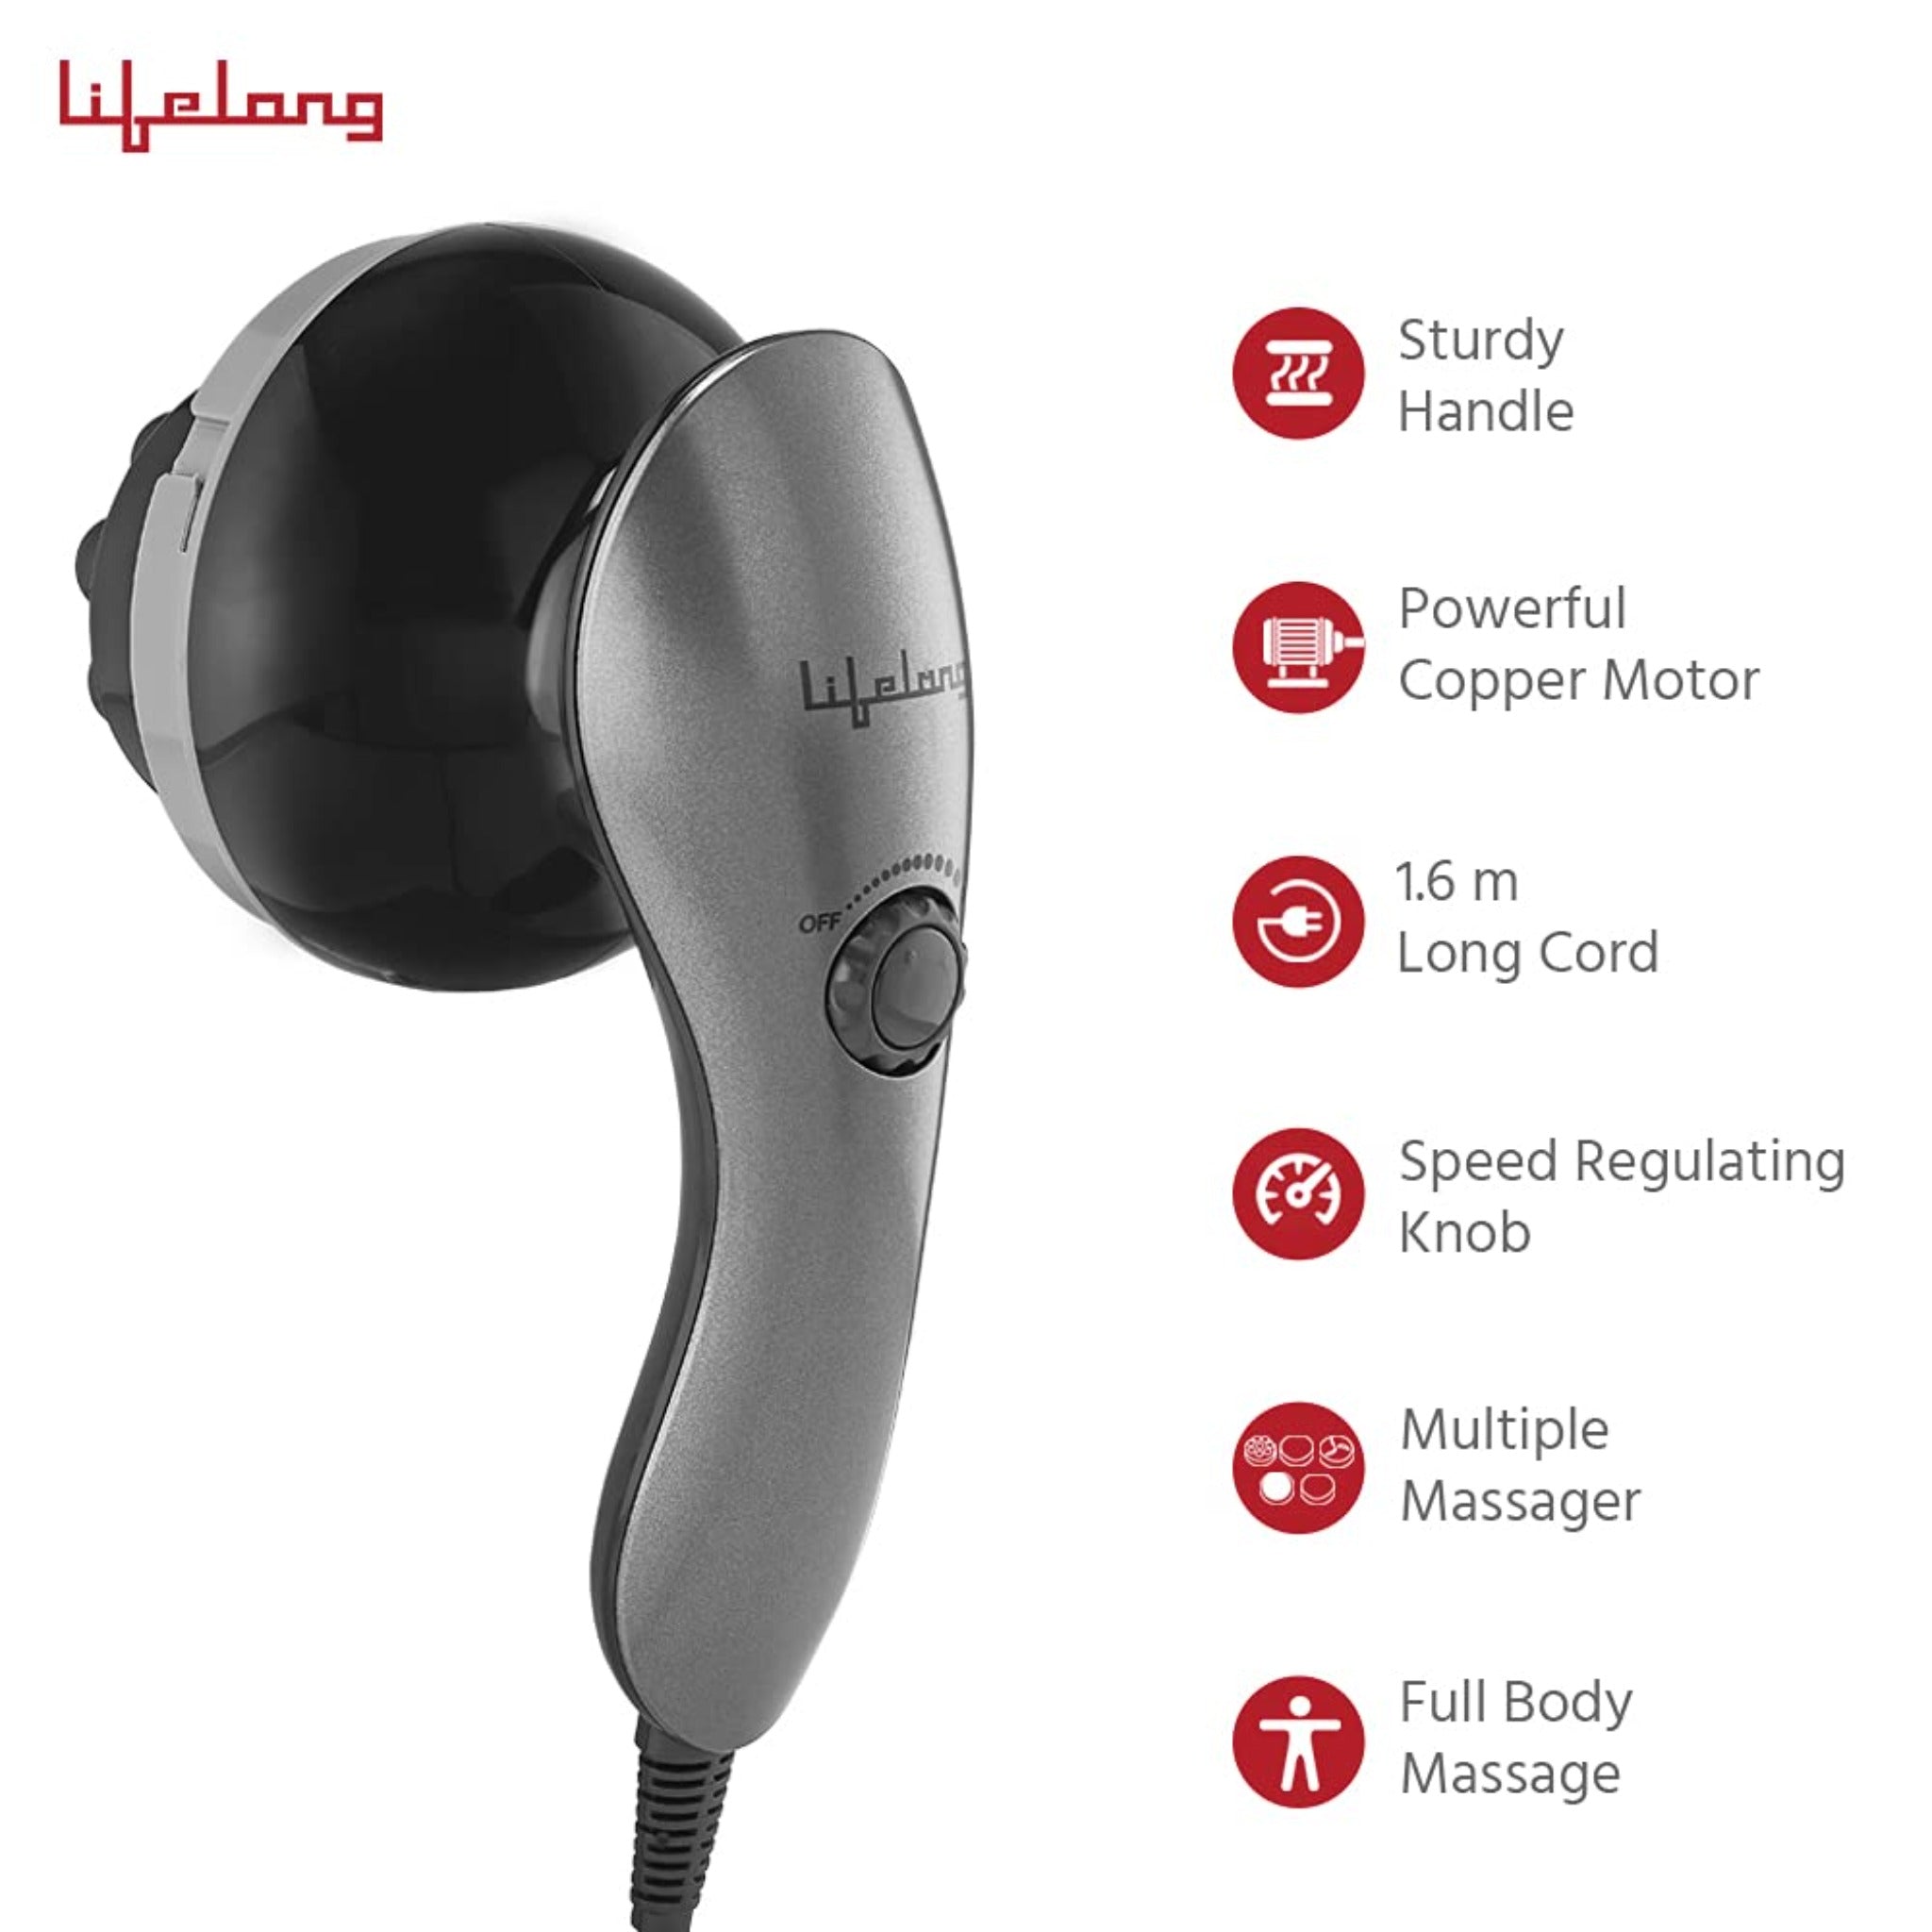 Lifelong Llm171 Electric Handheld Pain Relief Full Body Massager